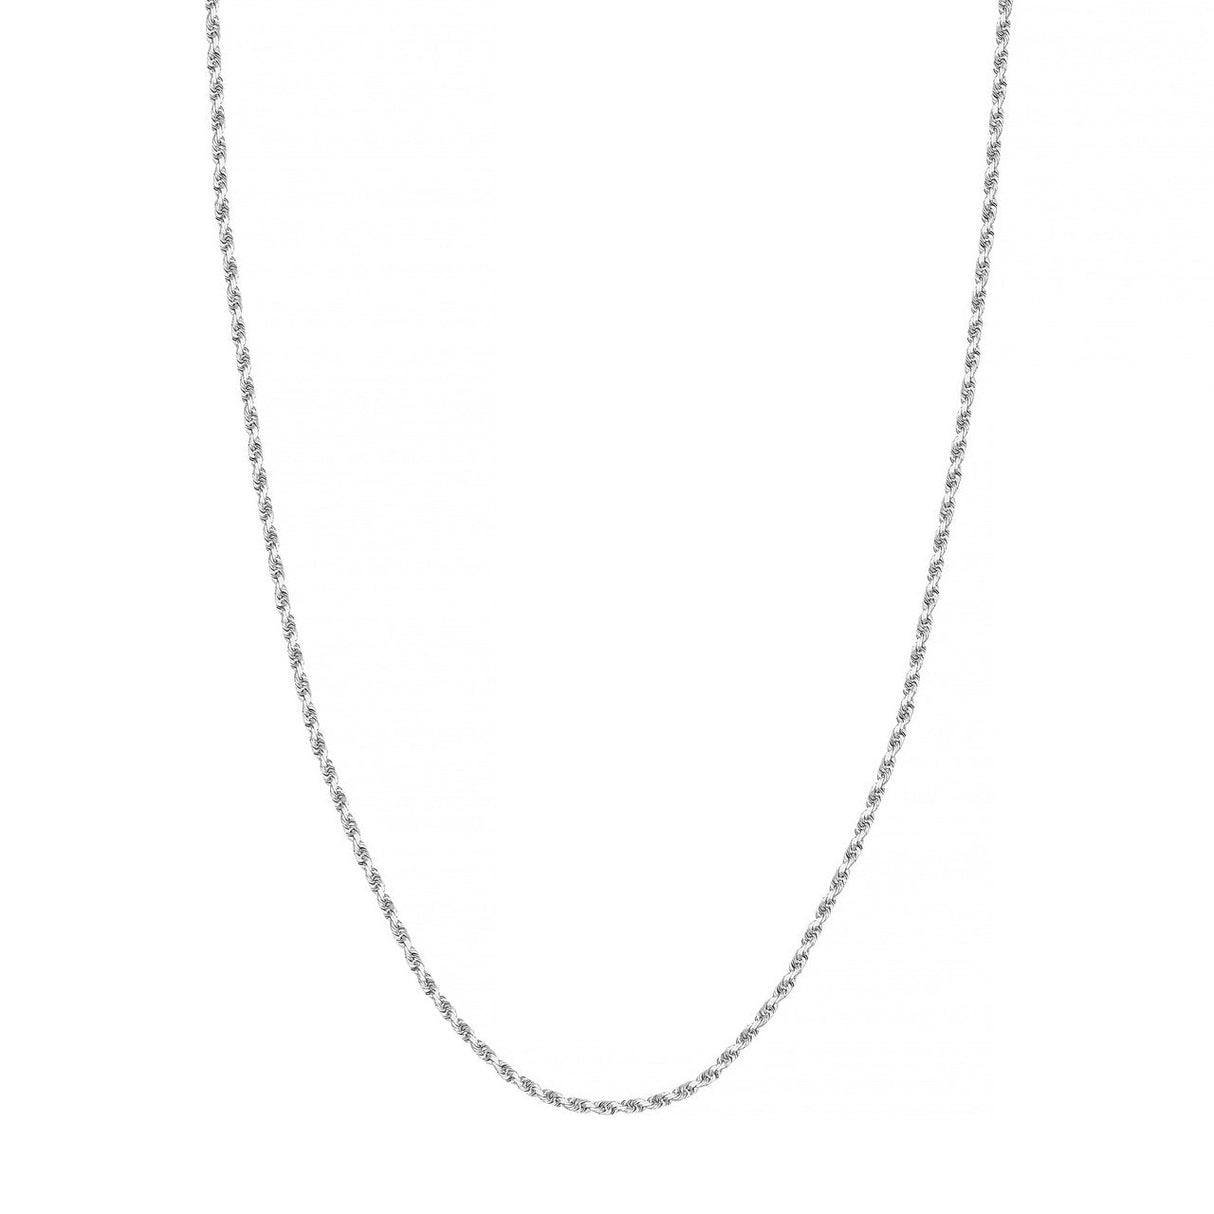 The image features the 2.15mm 14K Gold Diamond Cut Rope Chain in its full length, emphasizing its perfect width for a comfortable fit and lightweight wear